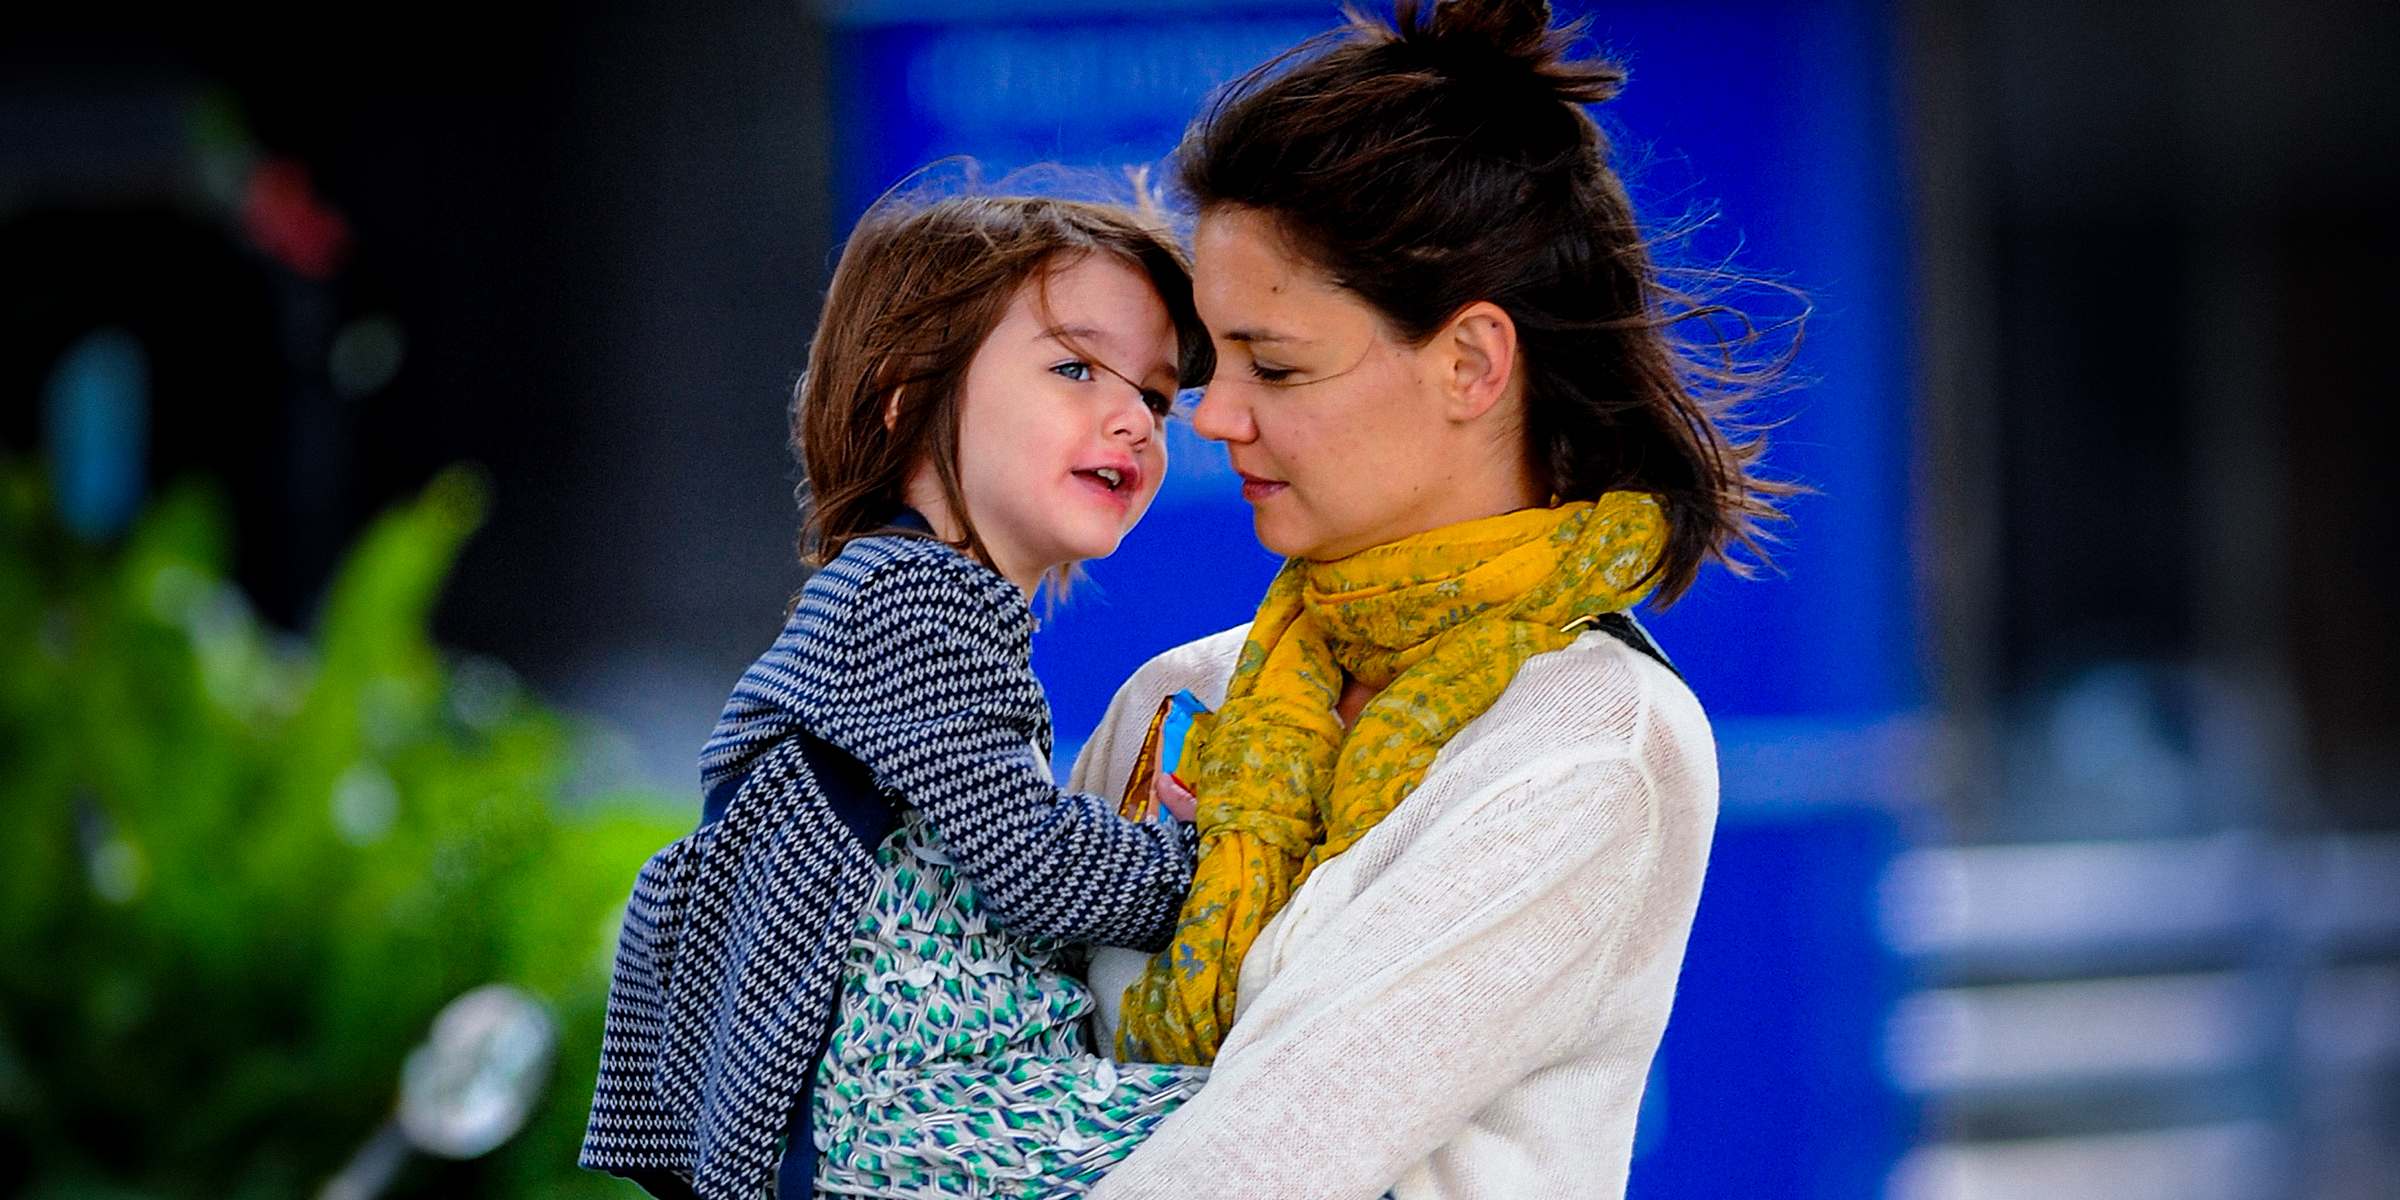 Suri Cruise and Katie Holmes | Source: Getty Images